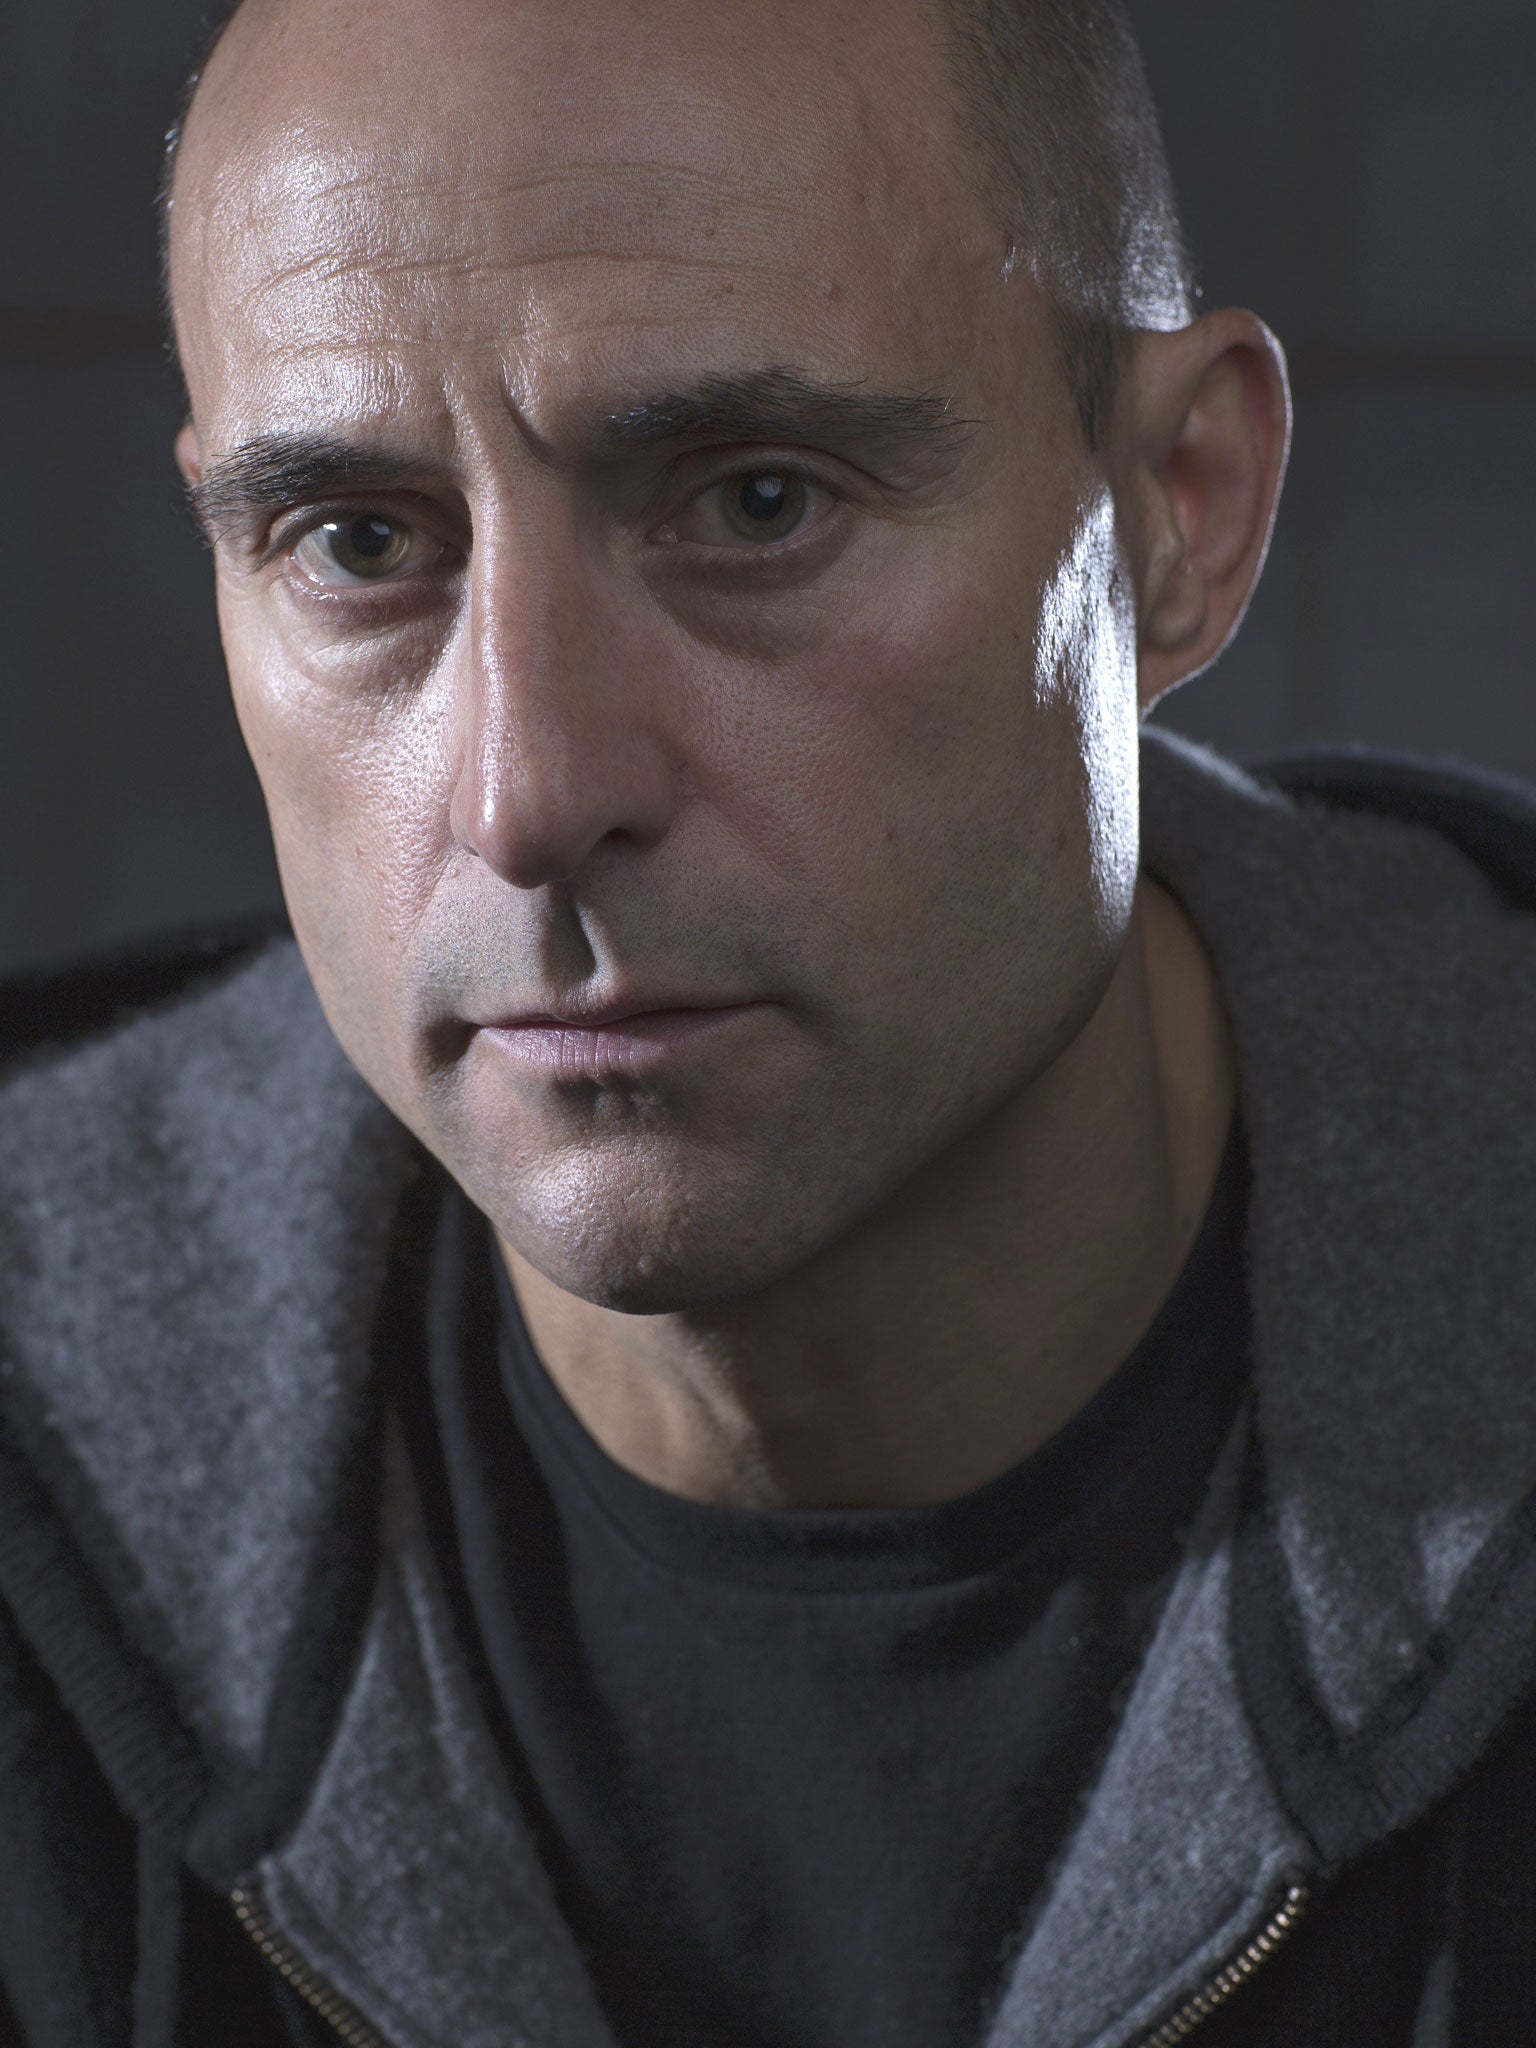 In Zero Dark Thirty, Mark Strong plays “George”, a senior CIA official charged with locating the world’s most wanted man. Strong remains mystified at the fuss around the film